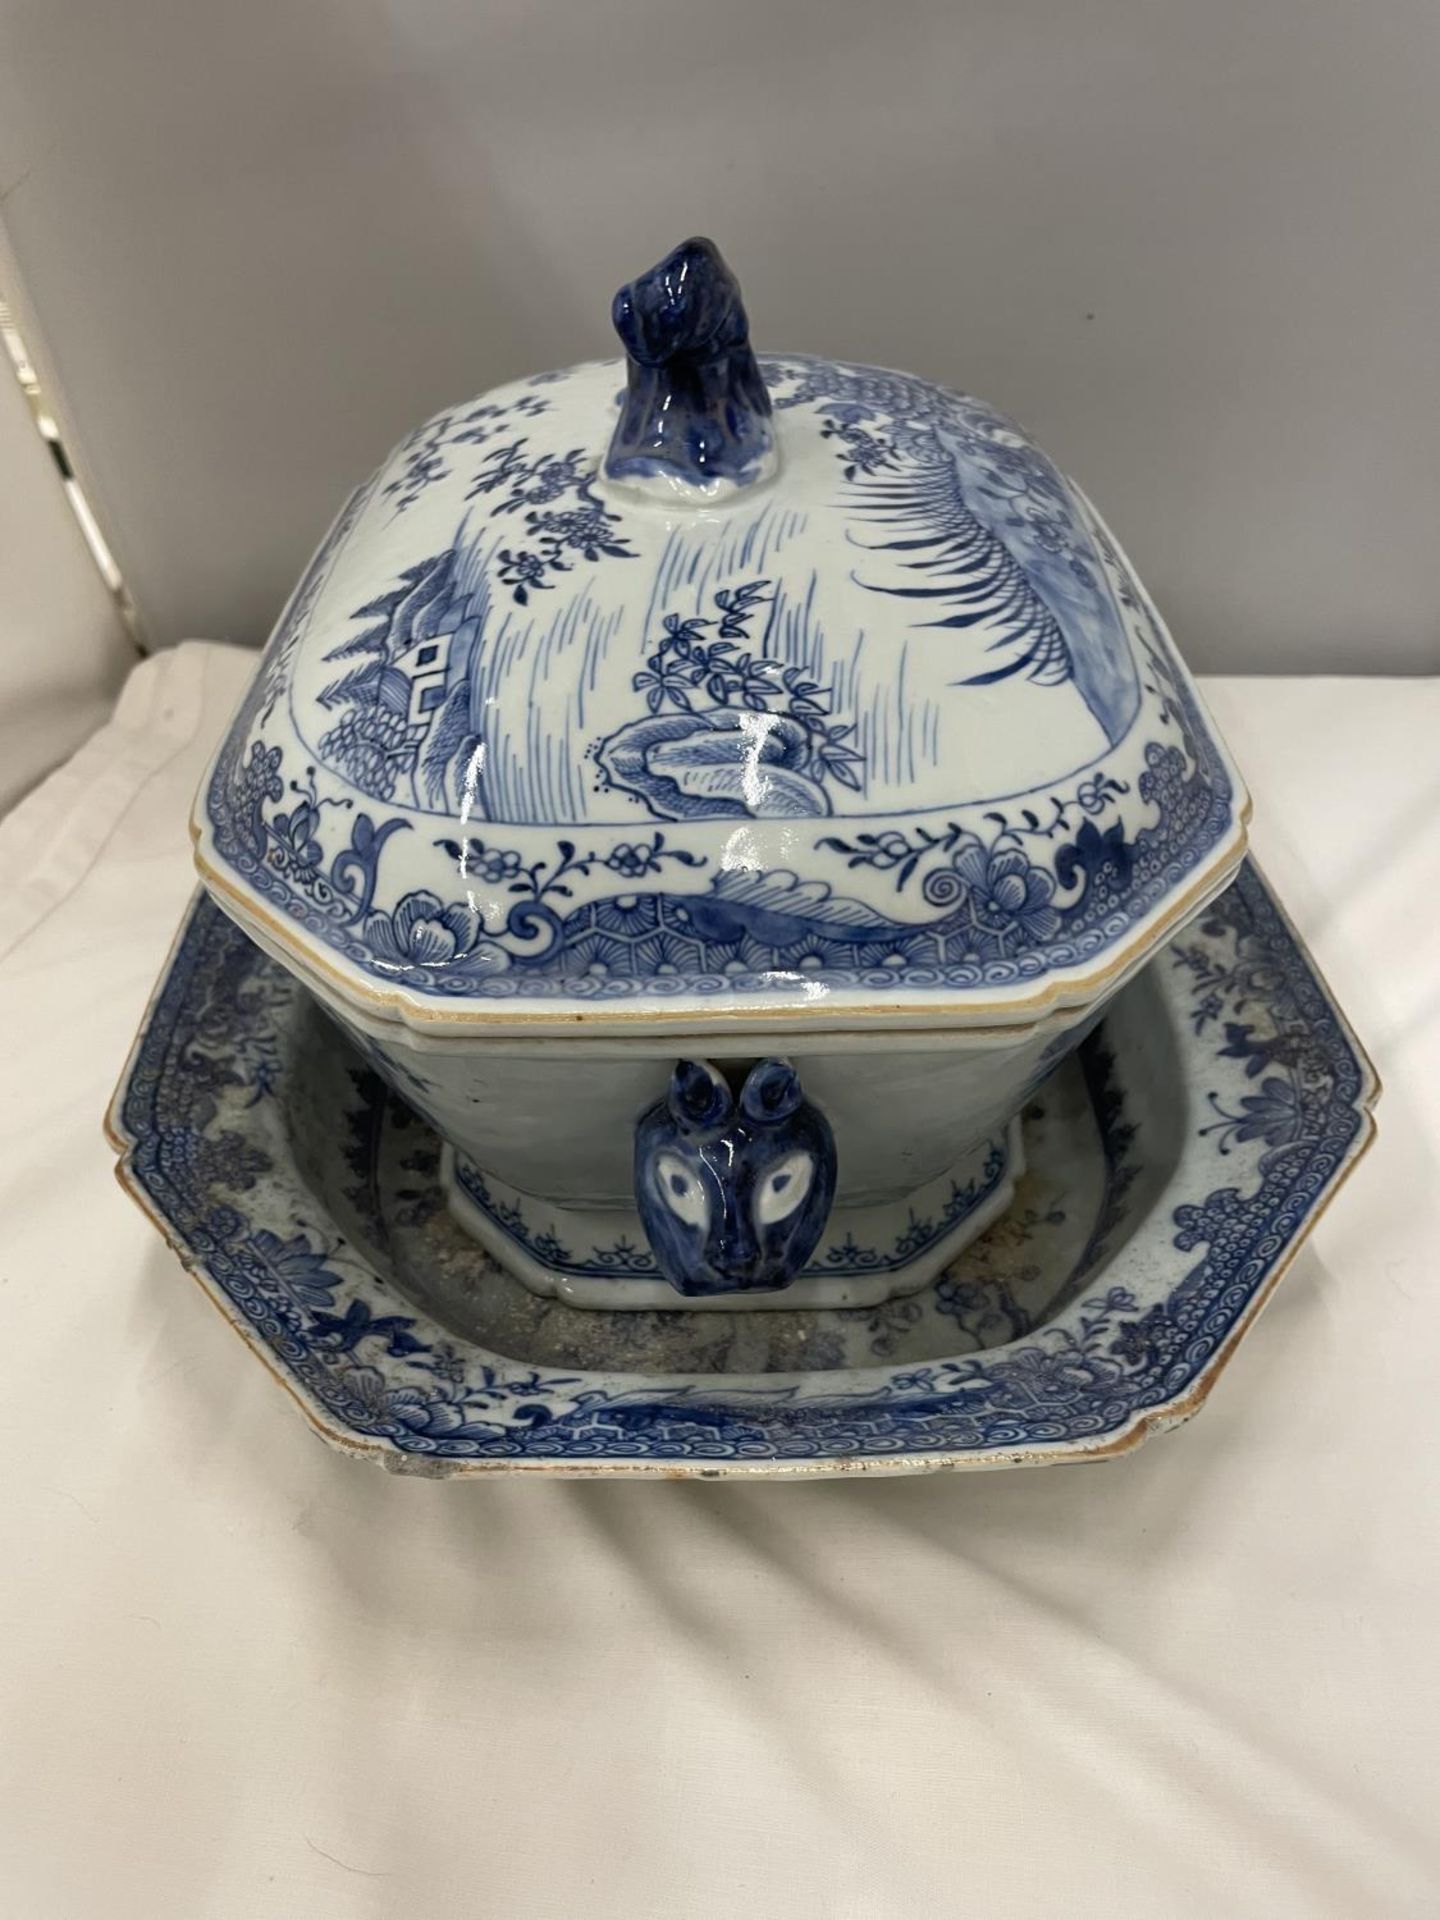 A BELIEVED TO BE LATE 18TH/EARLY 19TH CENTURY CHINESE QING DYNASTY/NANKIN BLUE AND WHITE LARGE - Image 3 of 9